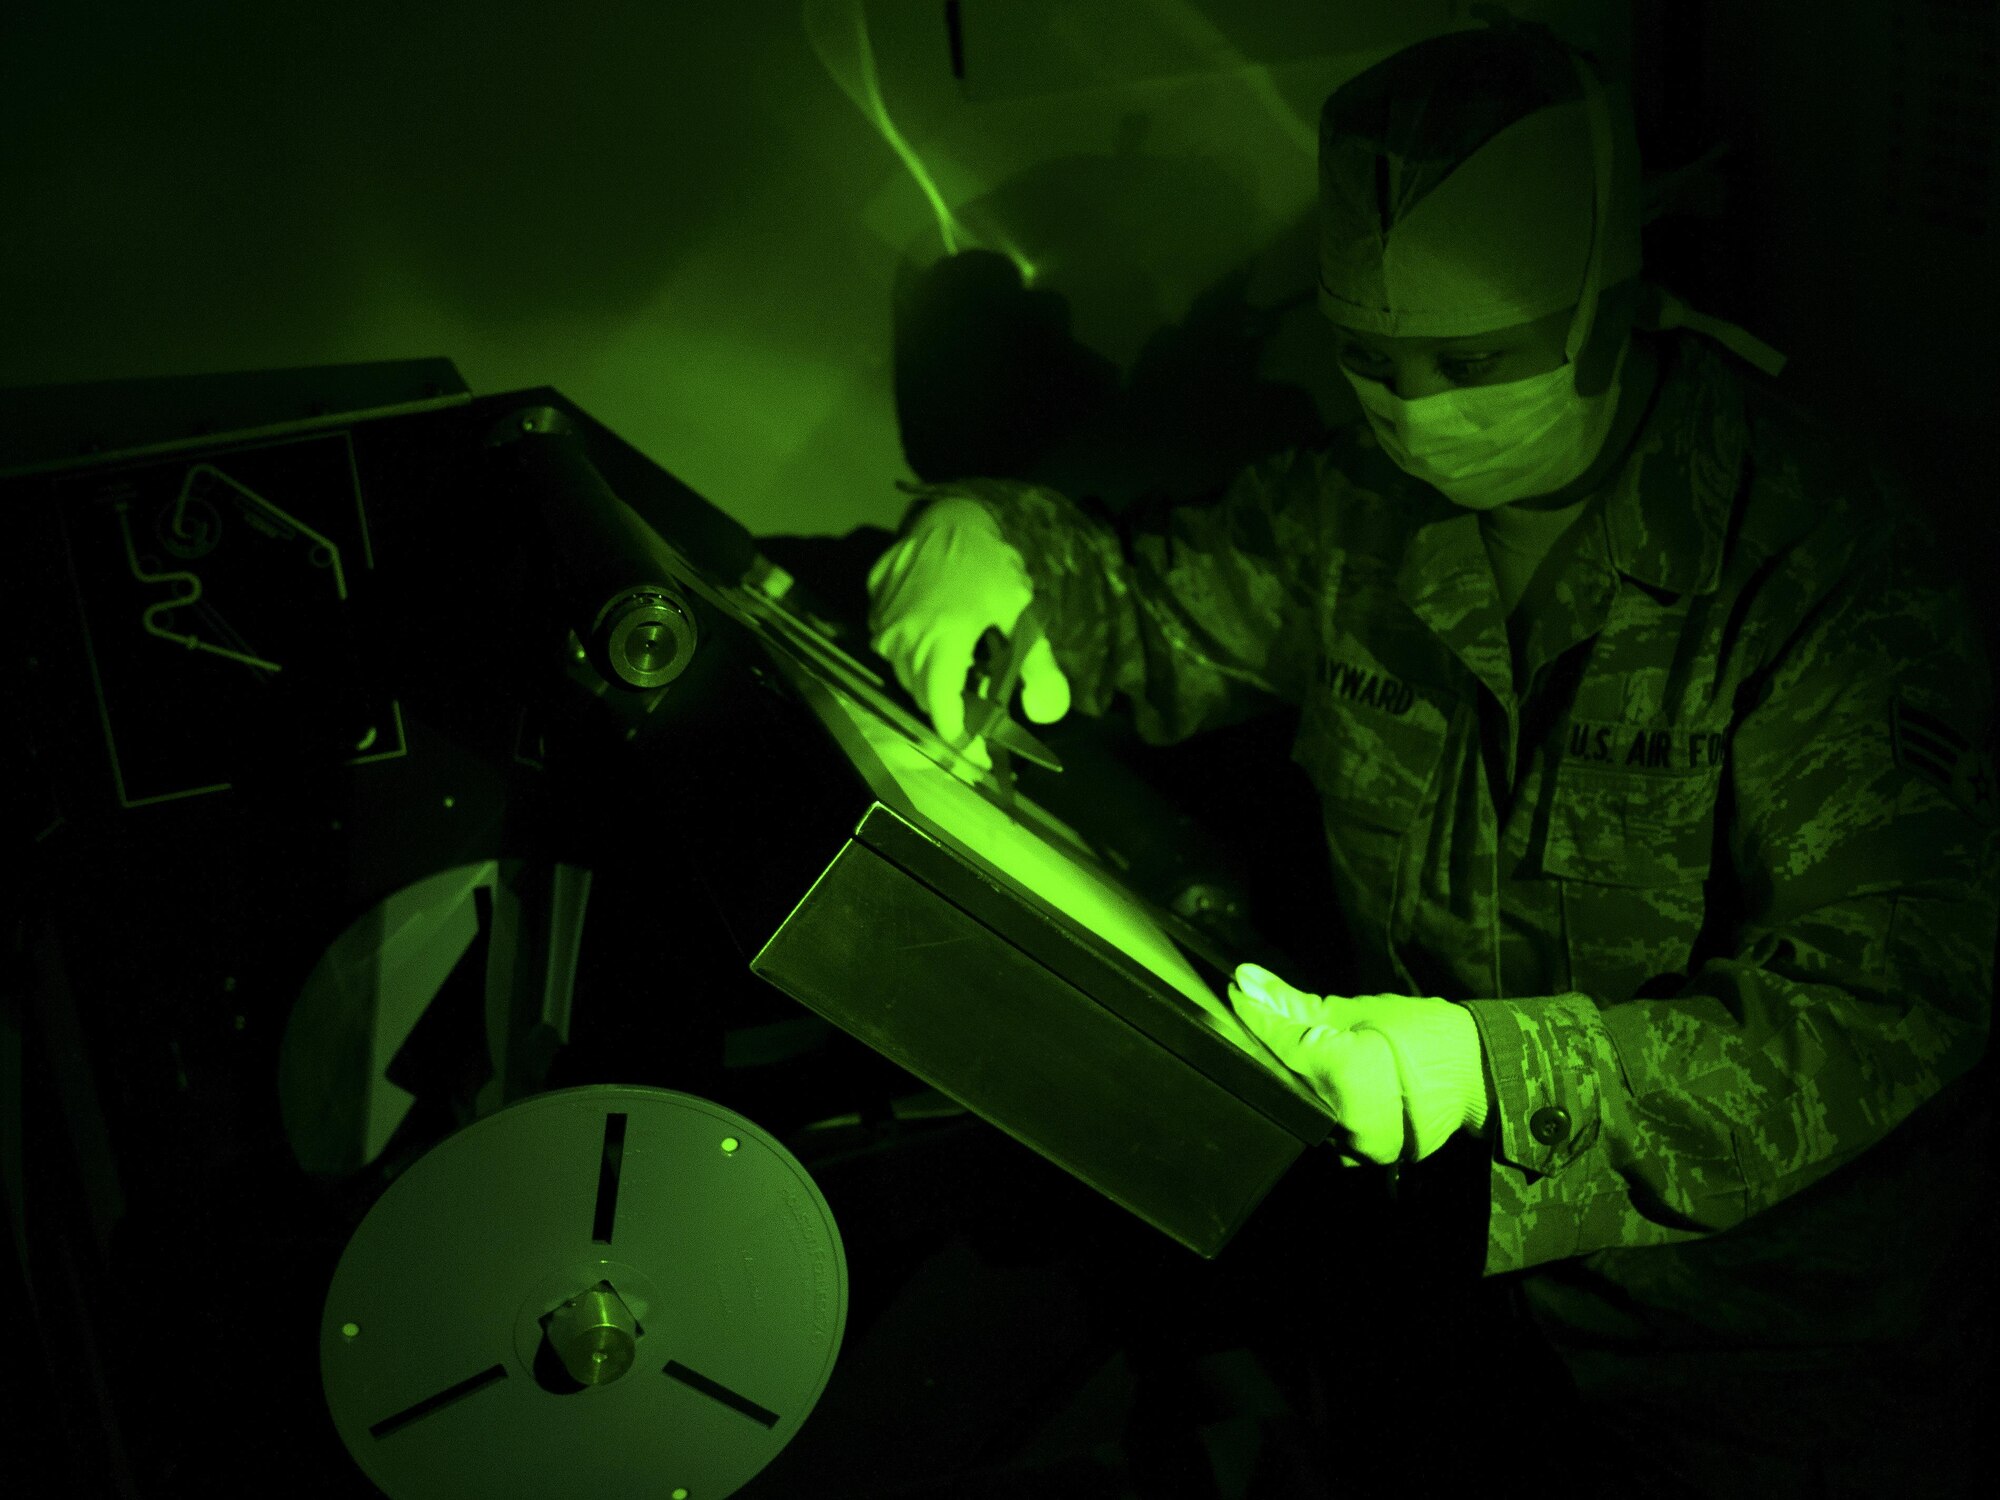 Senior Airman Heather Hayward, 9IS aerial film production specialist, cuts processed film during an Optical Bar Camera mission Feb. 17, 2015, at Beale Air Force Base, California. OBC Airmen work in a debris-free environment to develop 10,500 feet of film per mission, in either faint green light or complete darkness, using a Versamat 1140 film processor. From start to finish, it takes about nine hours to develop the entire film roll. (Air Force photo by Airman 1st Class Taylor A. Workman)